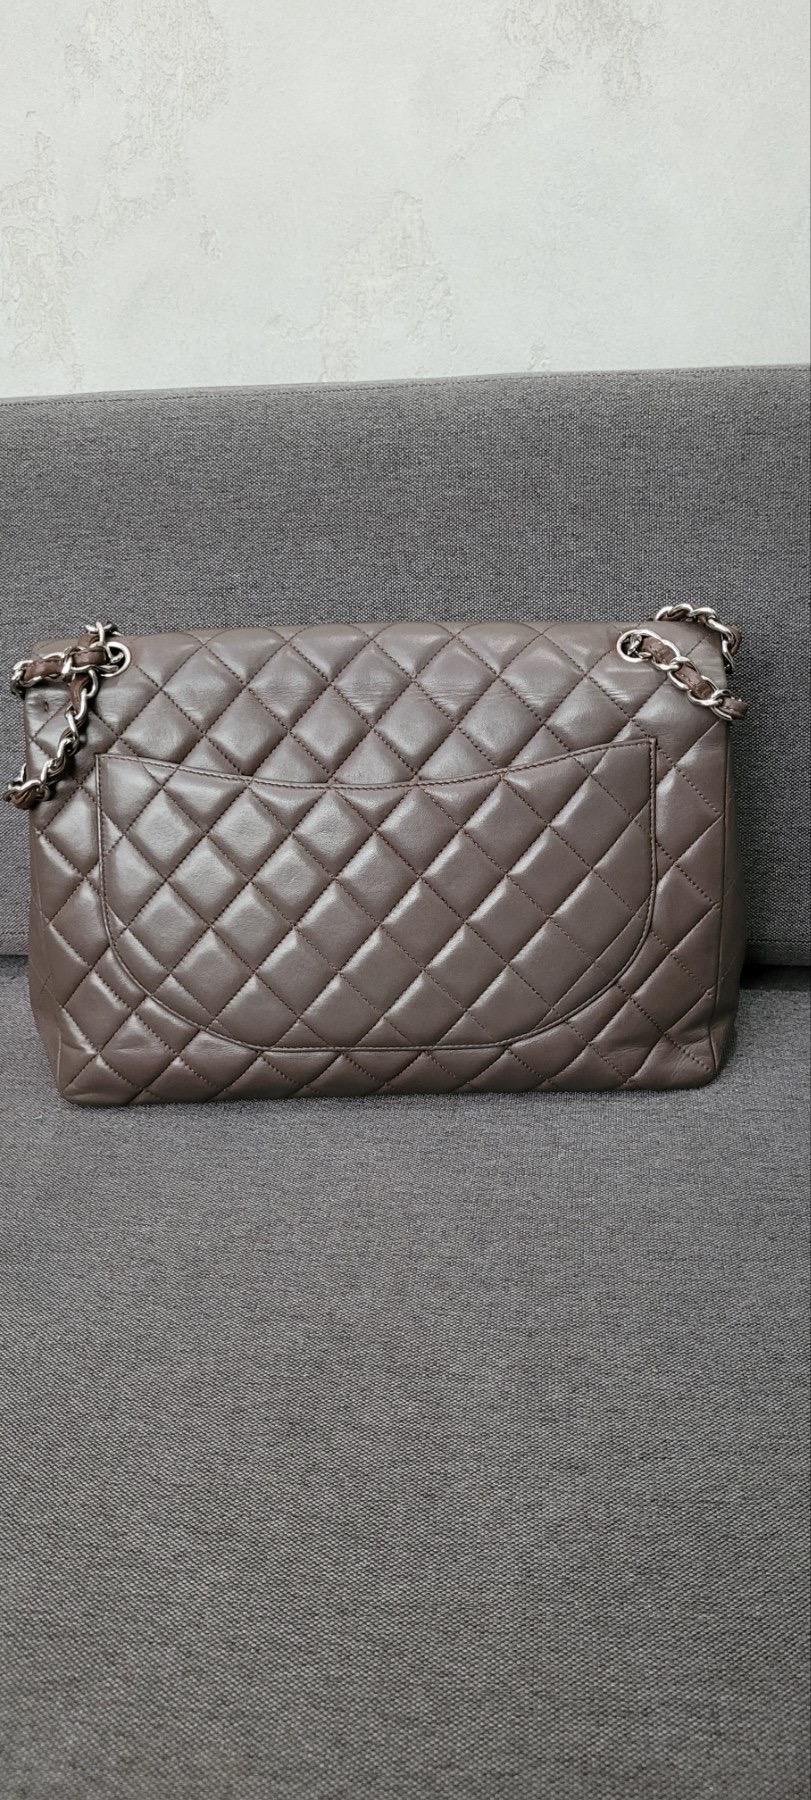 Chanel Brown Quilted Leather Jumbo Classic Single Flap Bag For Sale 6